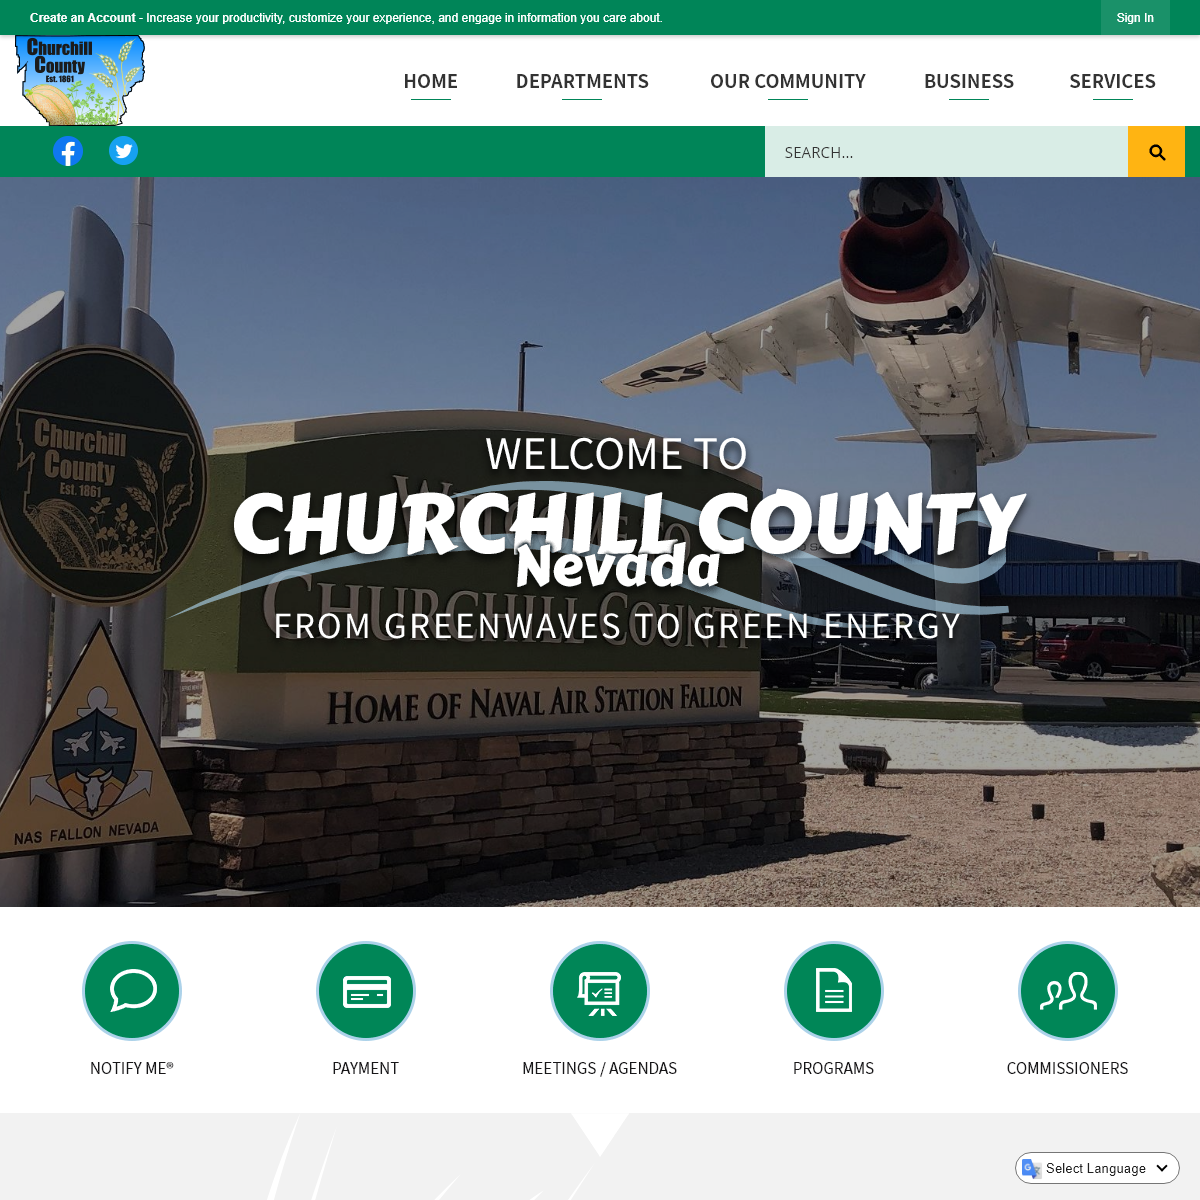 A complete backup of churchillcounty.org